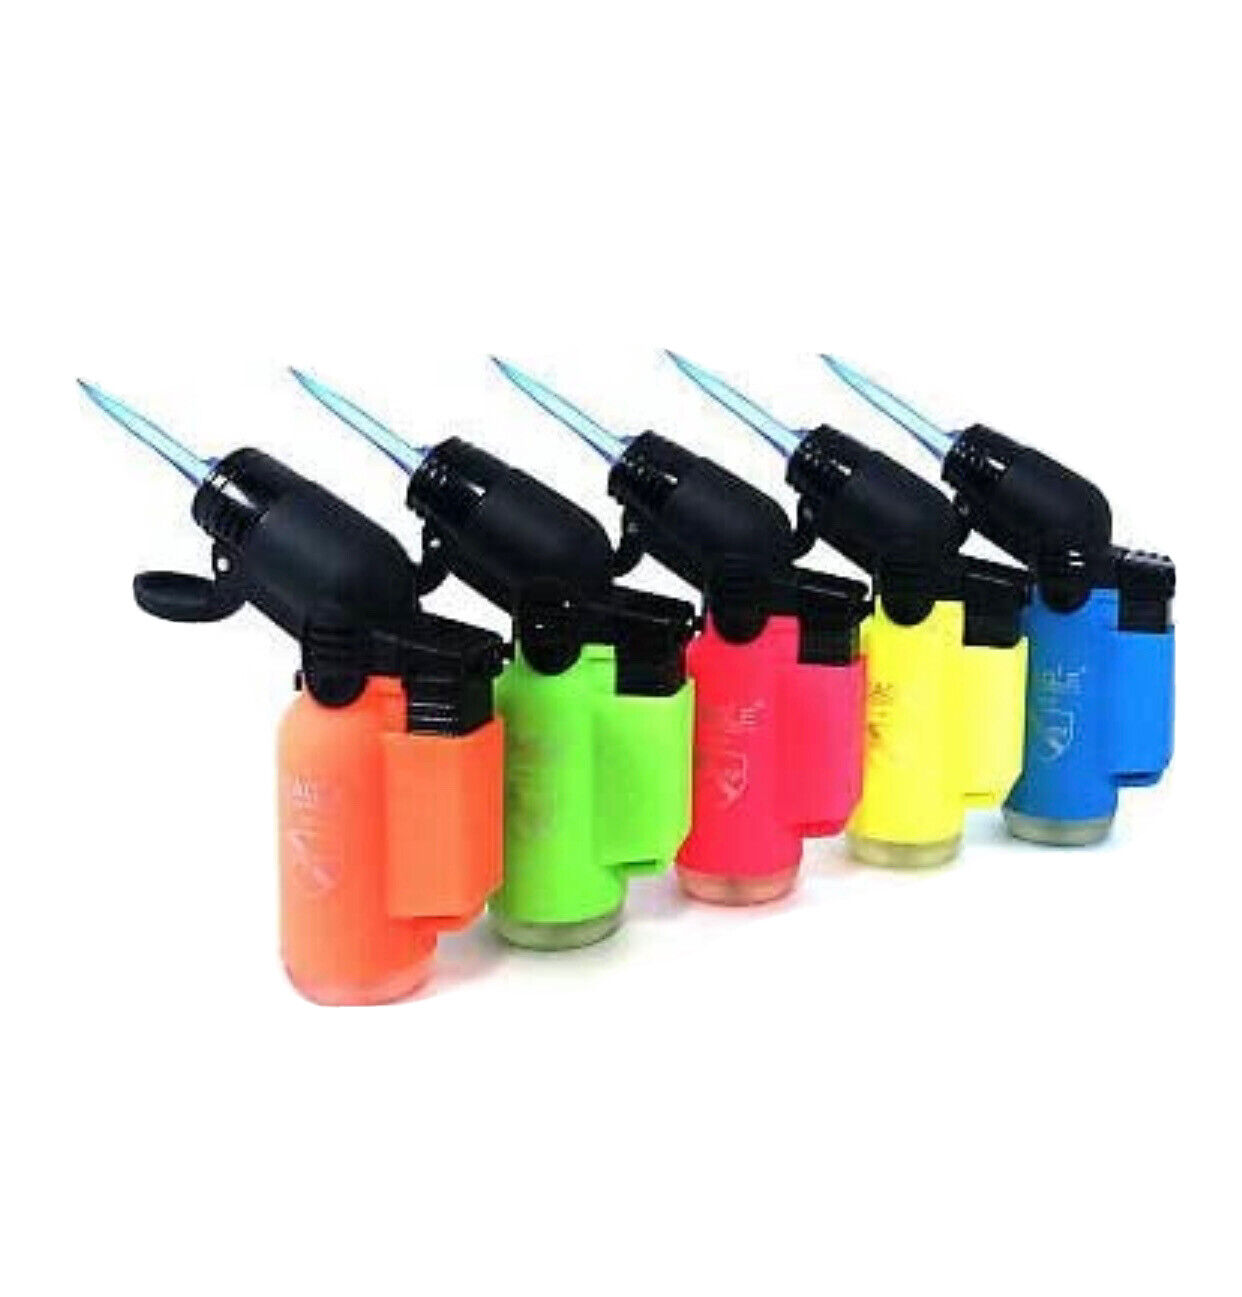 Eagle Torch 45 Degree Jet Flame Refillable Torch Lighter (Neon Colors) - 5 Pack